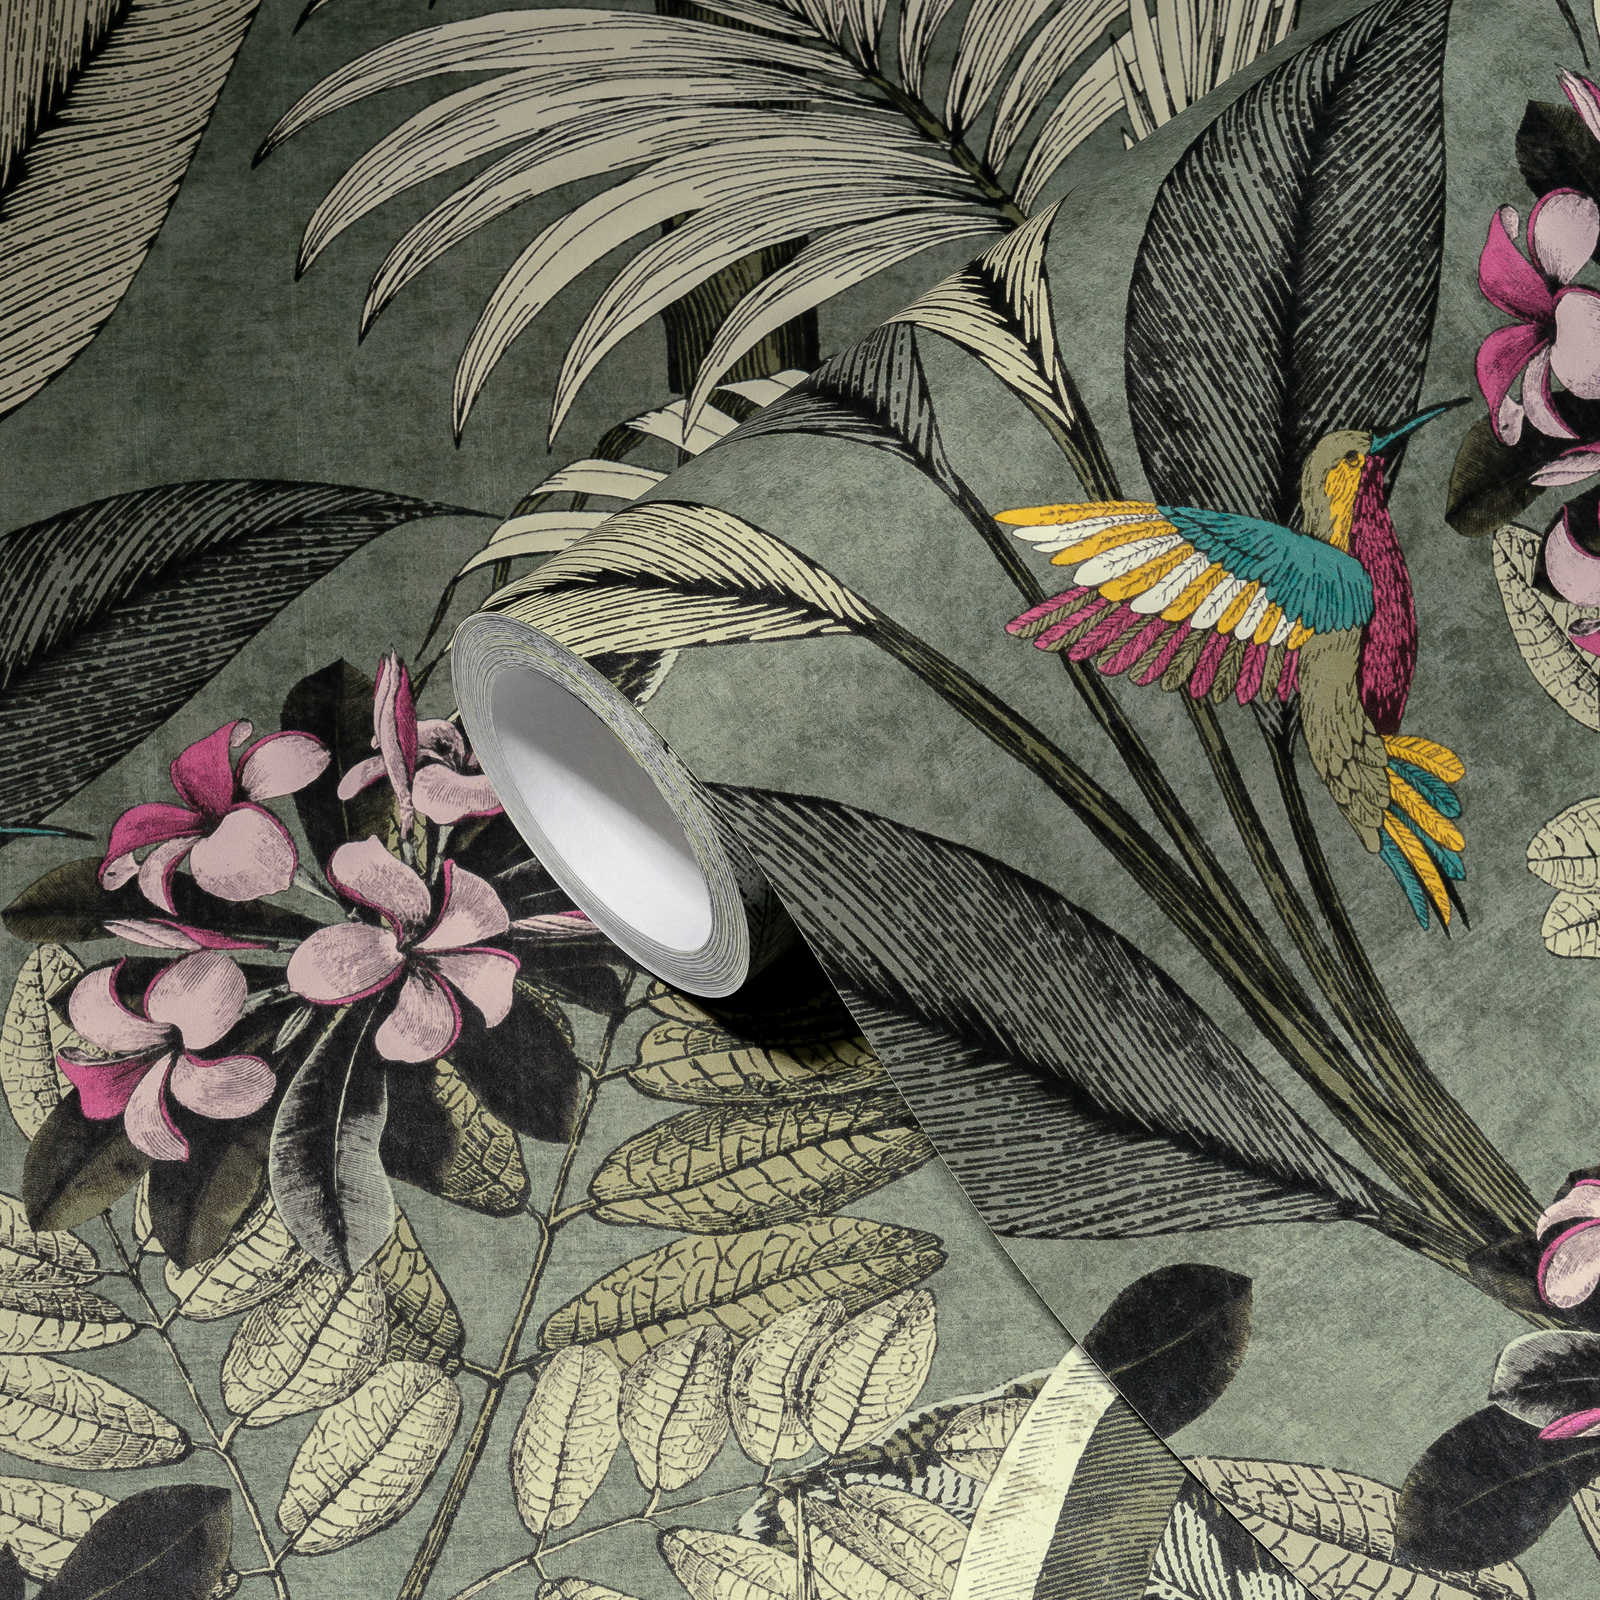             Jungle wallpaper leaves, flowers and birds - grey, green
        